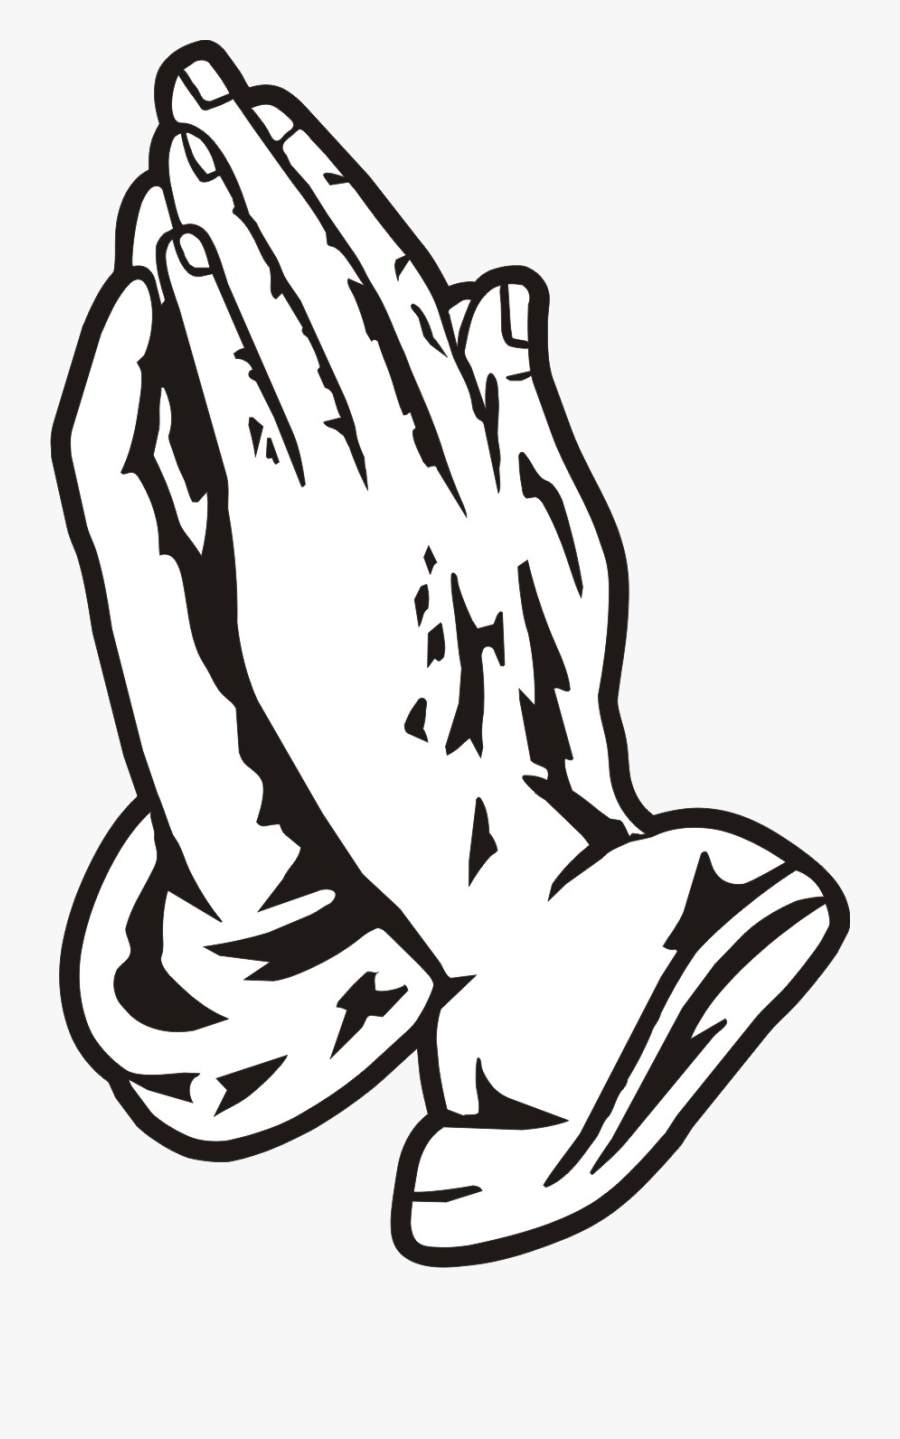 Praying Hands Black Clipart Free Images Transparent - Drake Praying Hands Drawing, Transparent Clipart